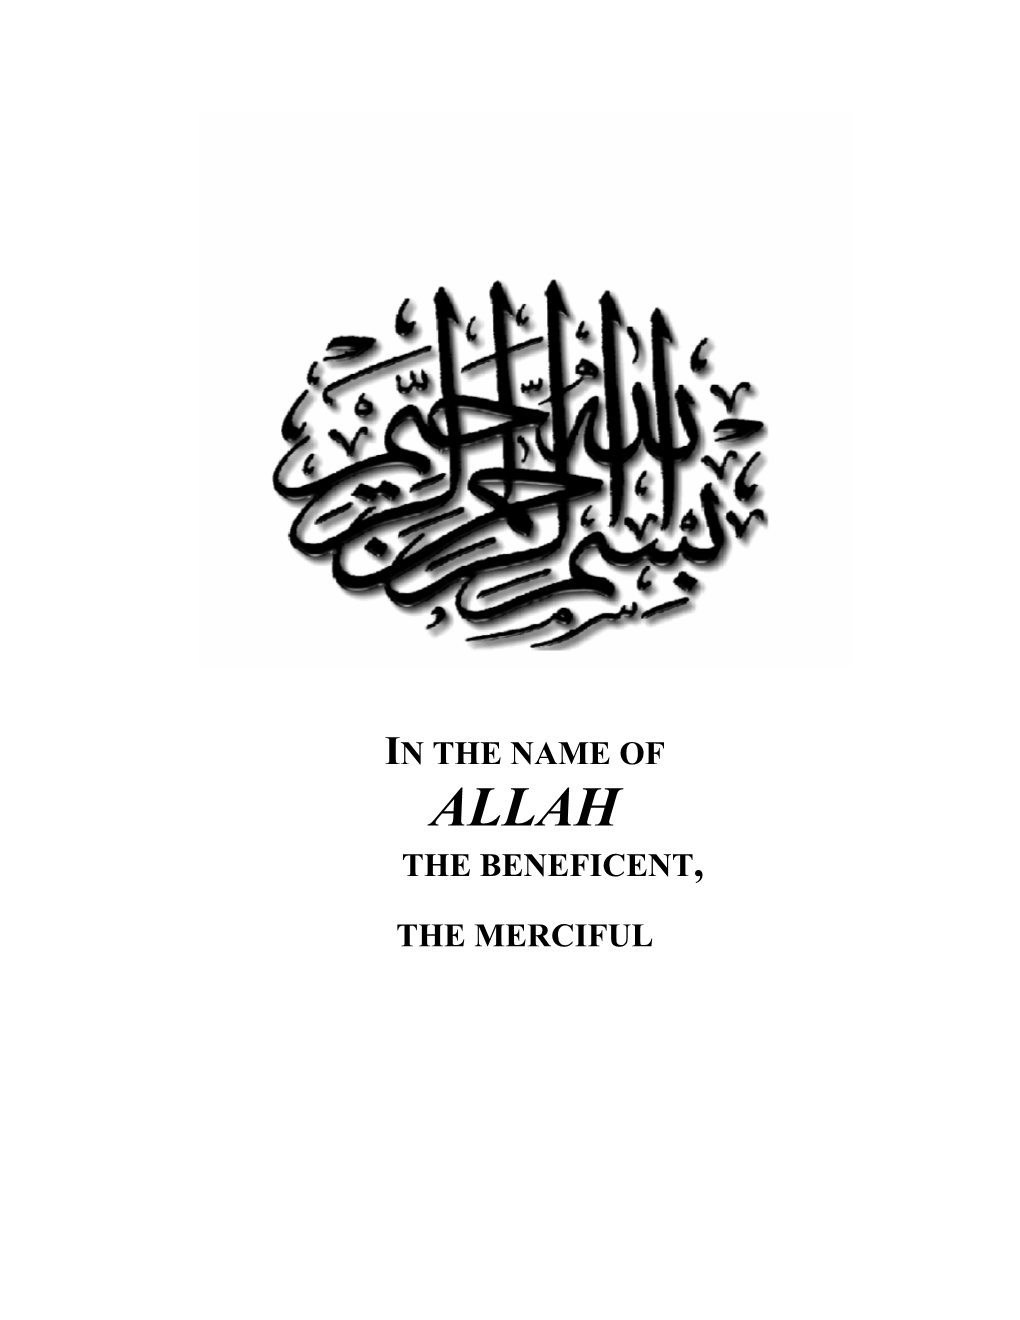 In the Name of the Beneficent, the Merciful